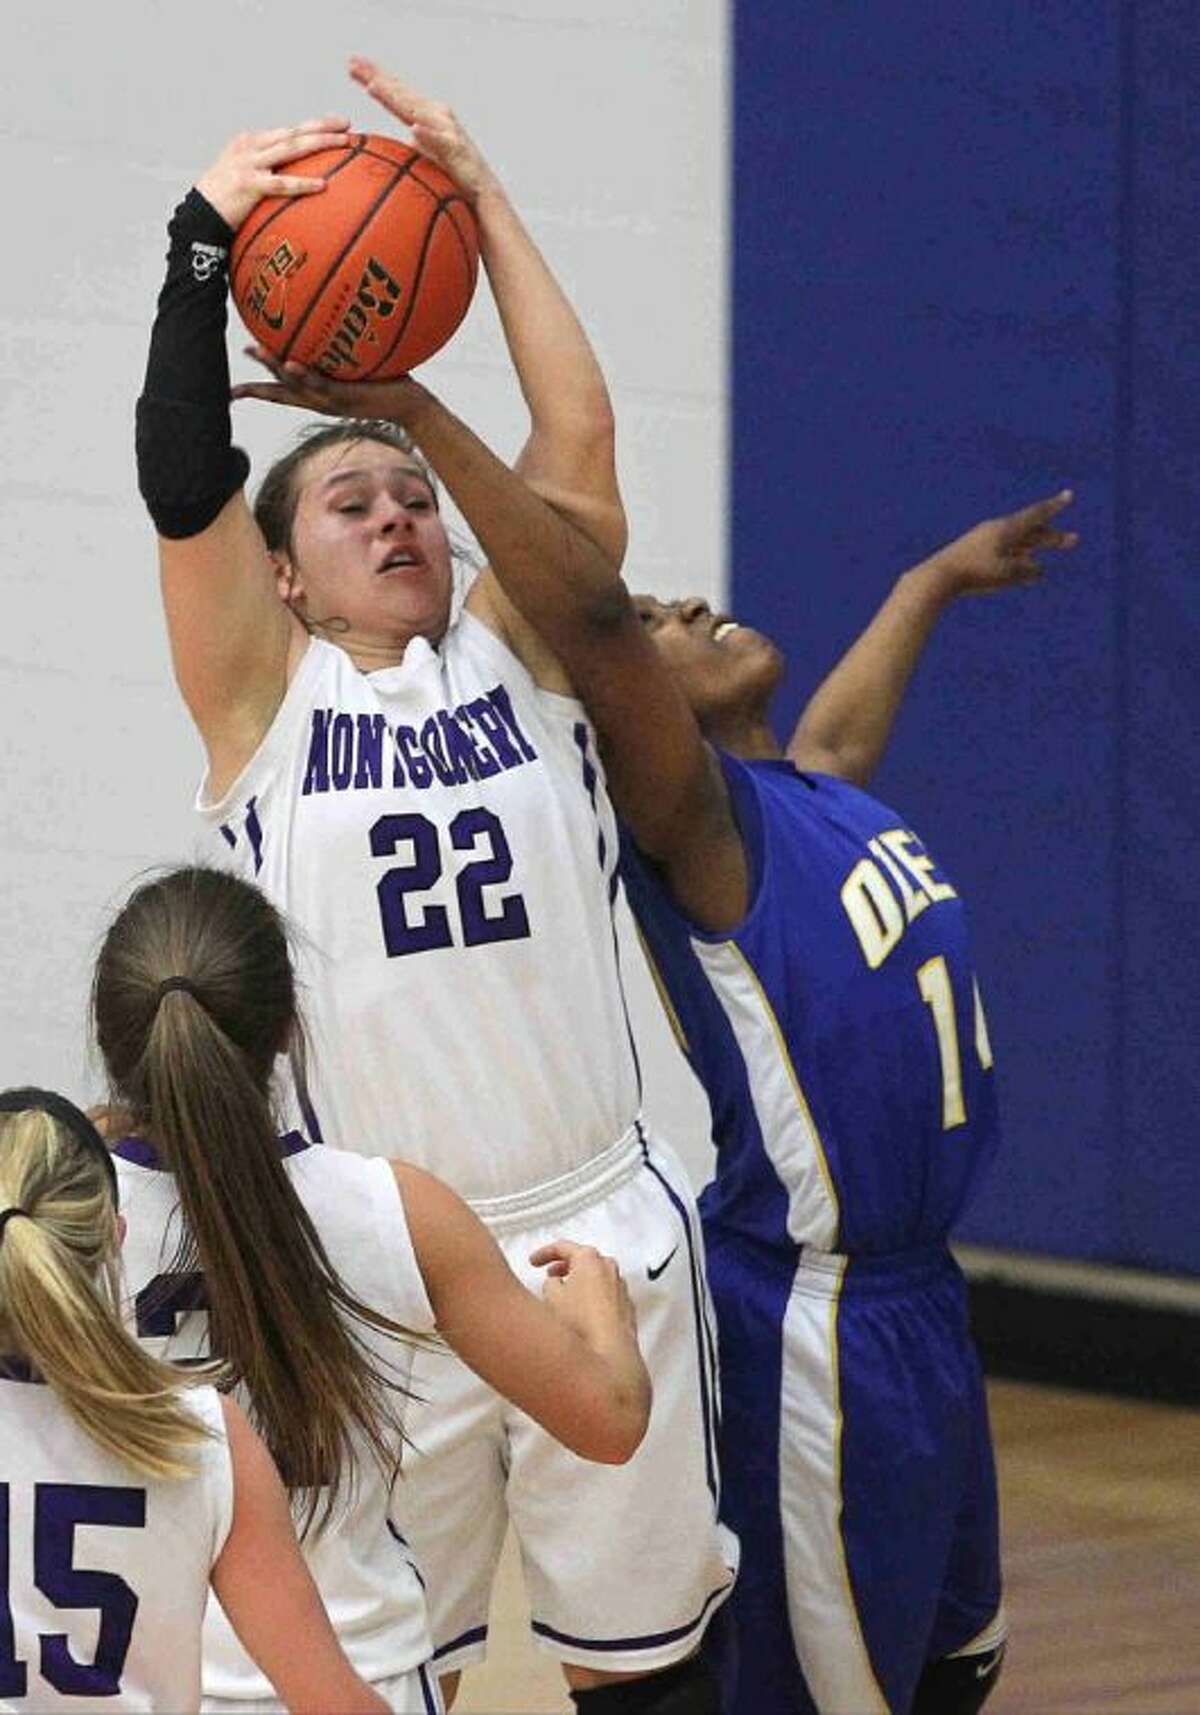 Montgomery’s Marissa Garcia grabs a rebound over Ozen’s Essyncce Templeton during a Region III-4A quarterfinal girls basketball game in Channelview Tuesday. To view or purchase this photo and others like it, visit HCNpics.com.